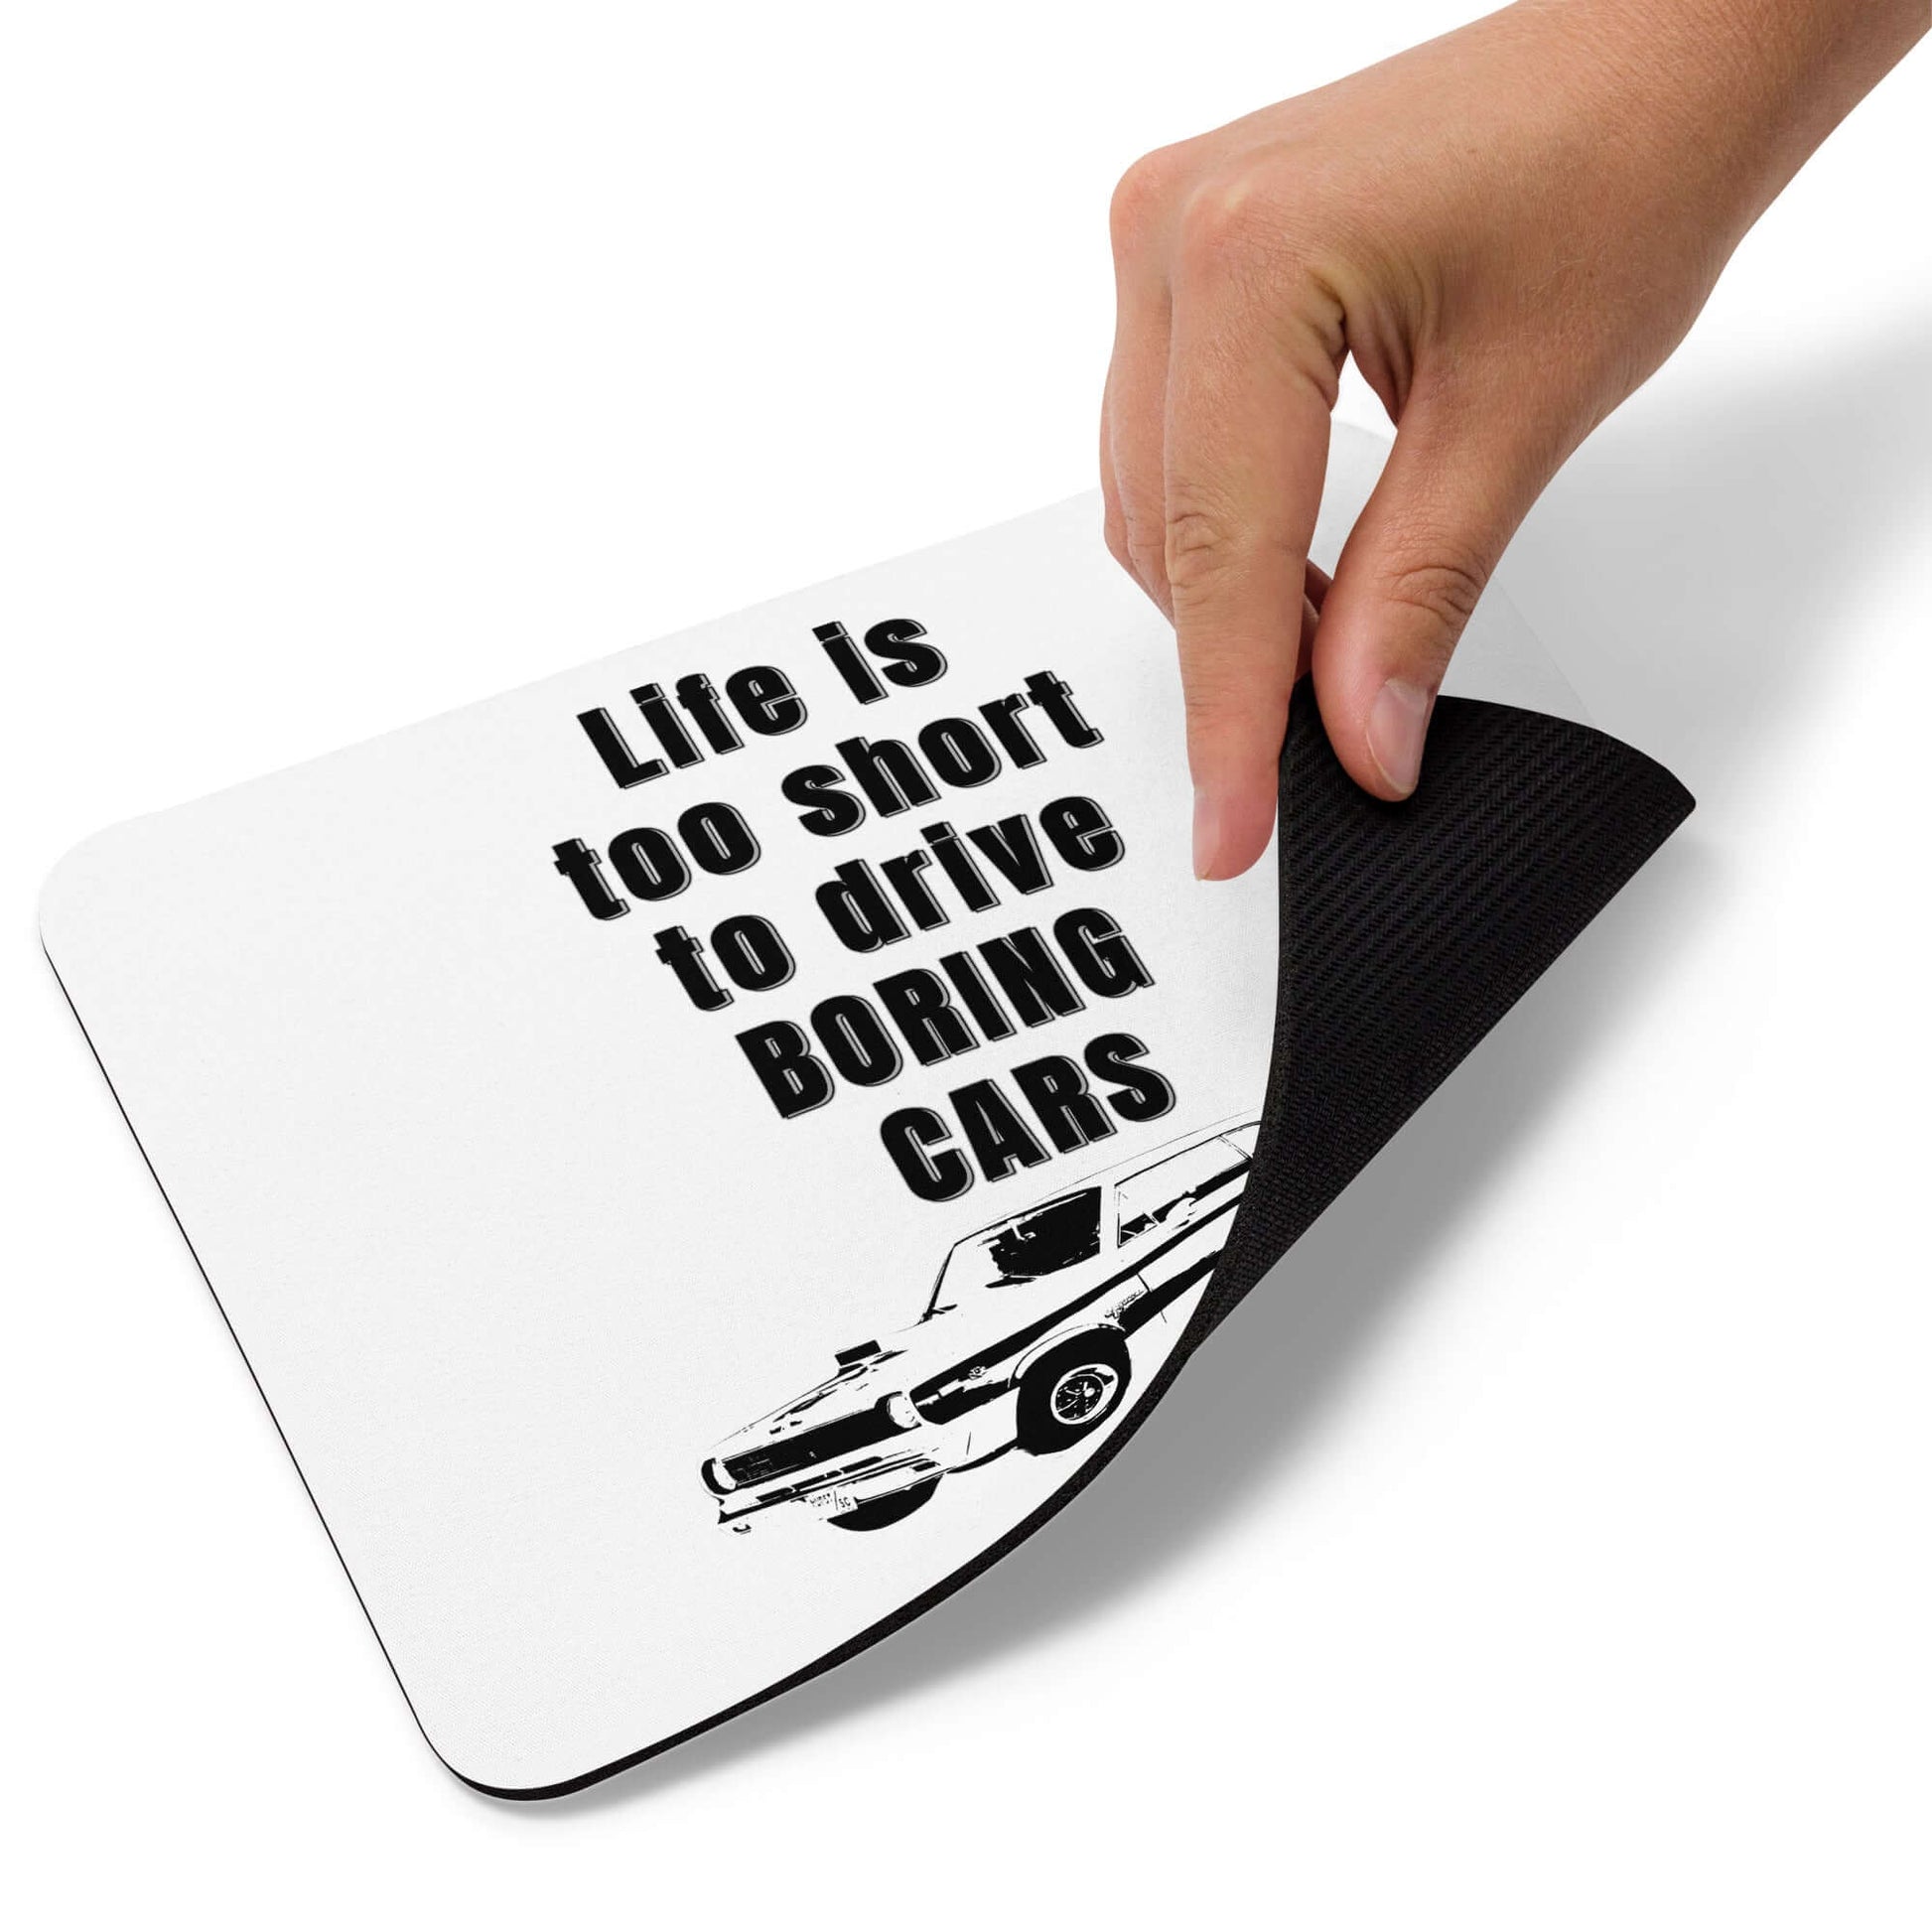 Life is too short to be driving boring cars - 1969 AMC Rambler - Mouse pad - Horrible Designs